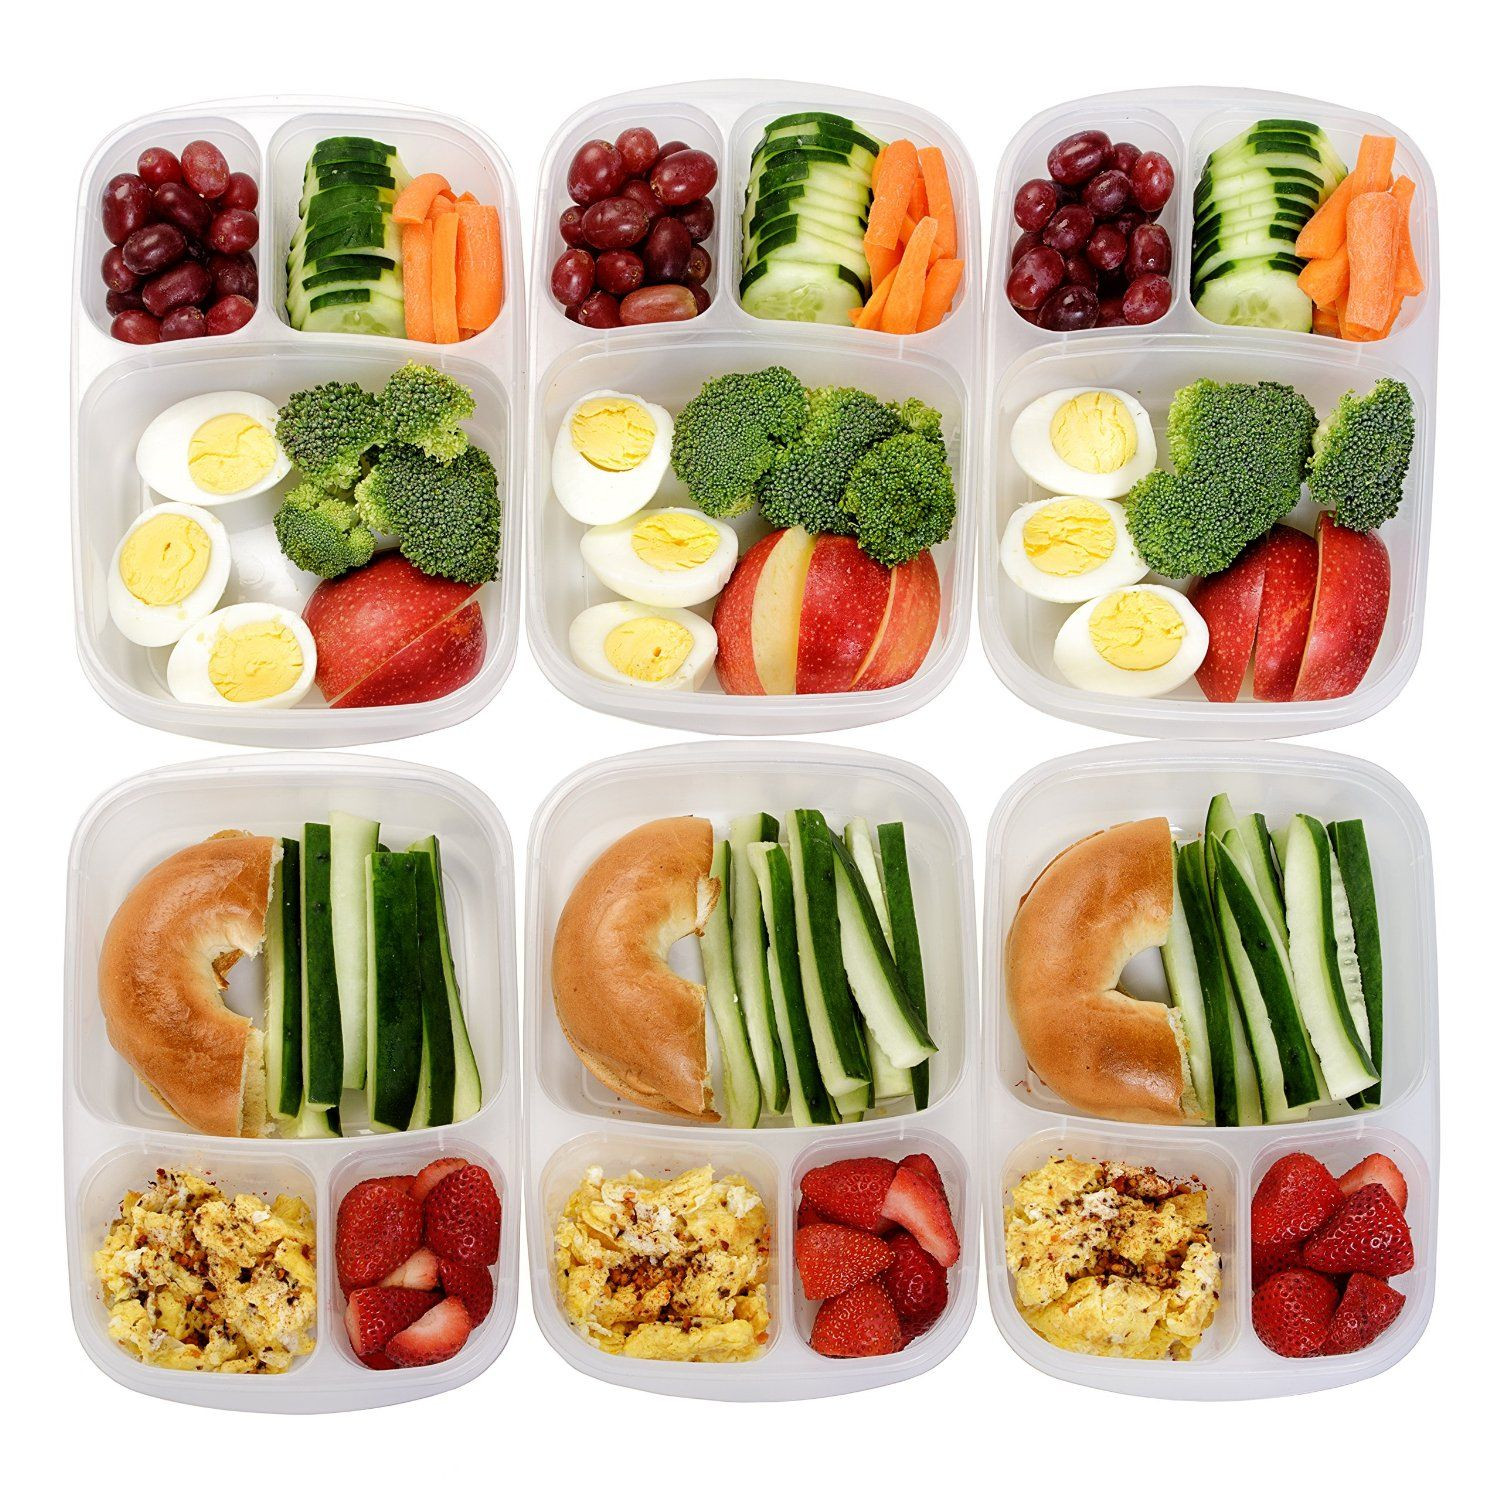 Healthy Meals And Snacks For Weight Loss
 13 Make Ahead Meals and Snacks For Healthy Eating The